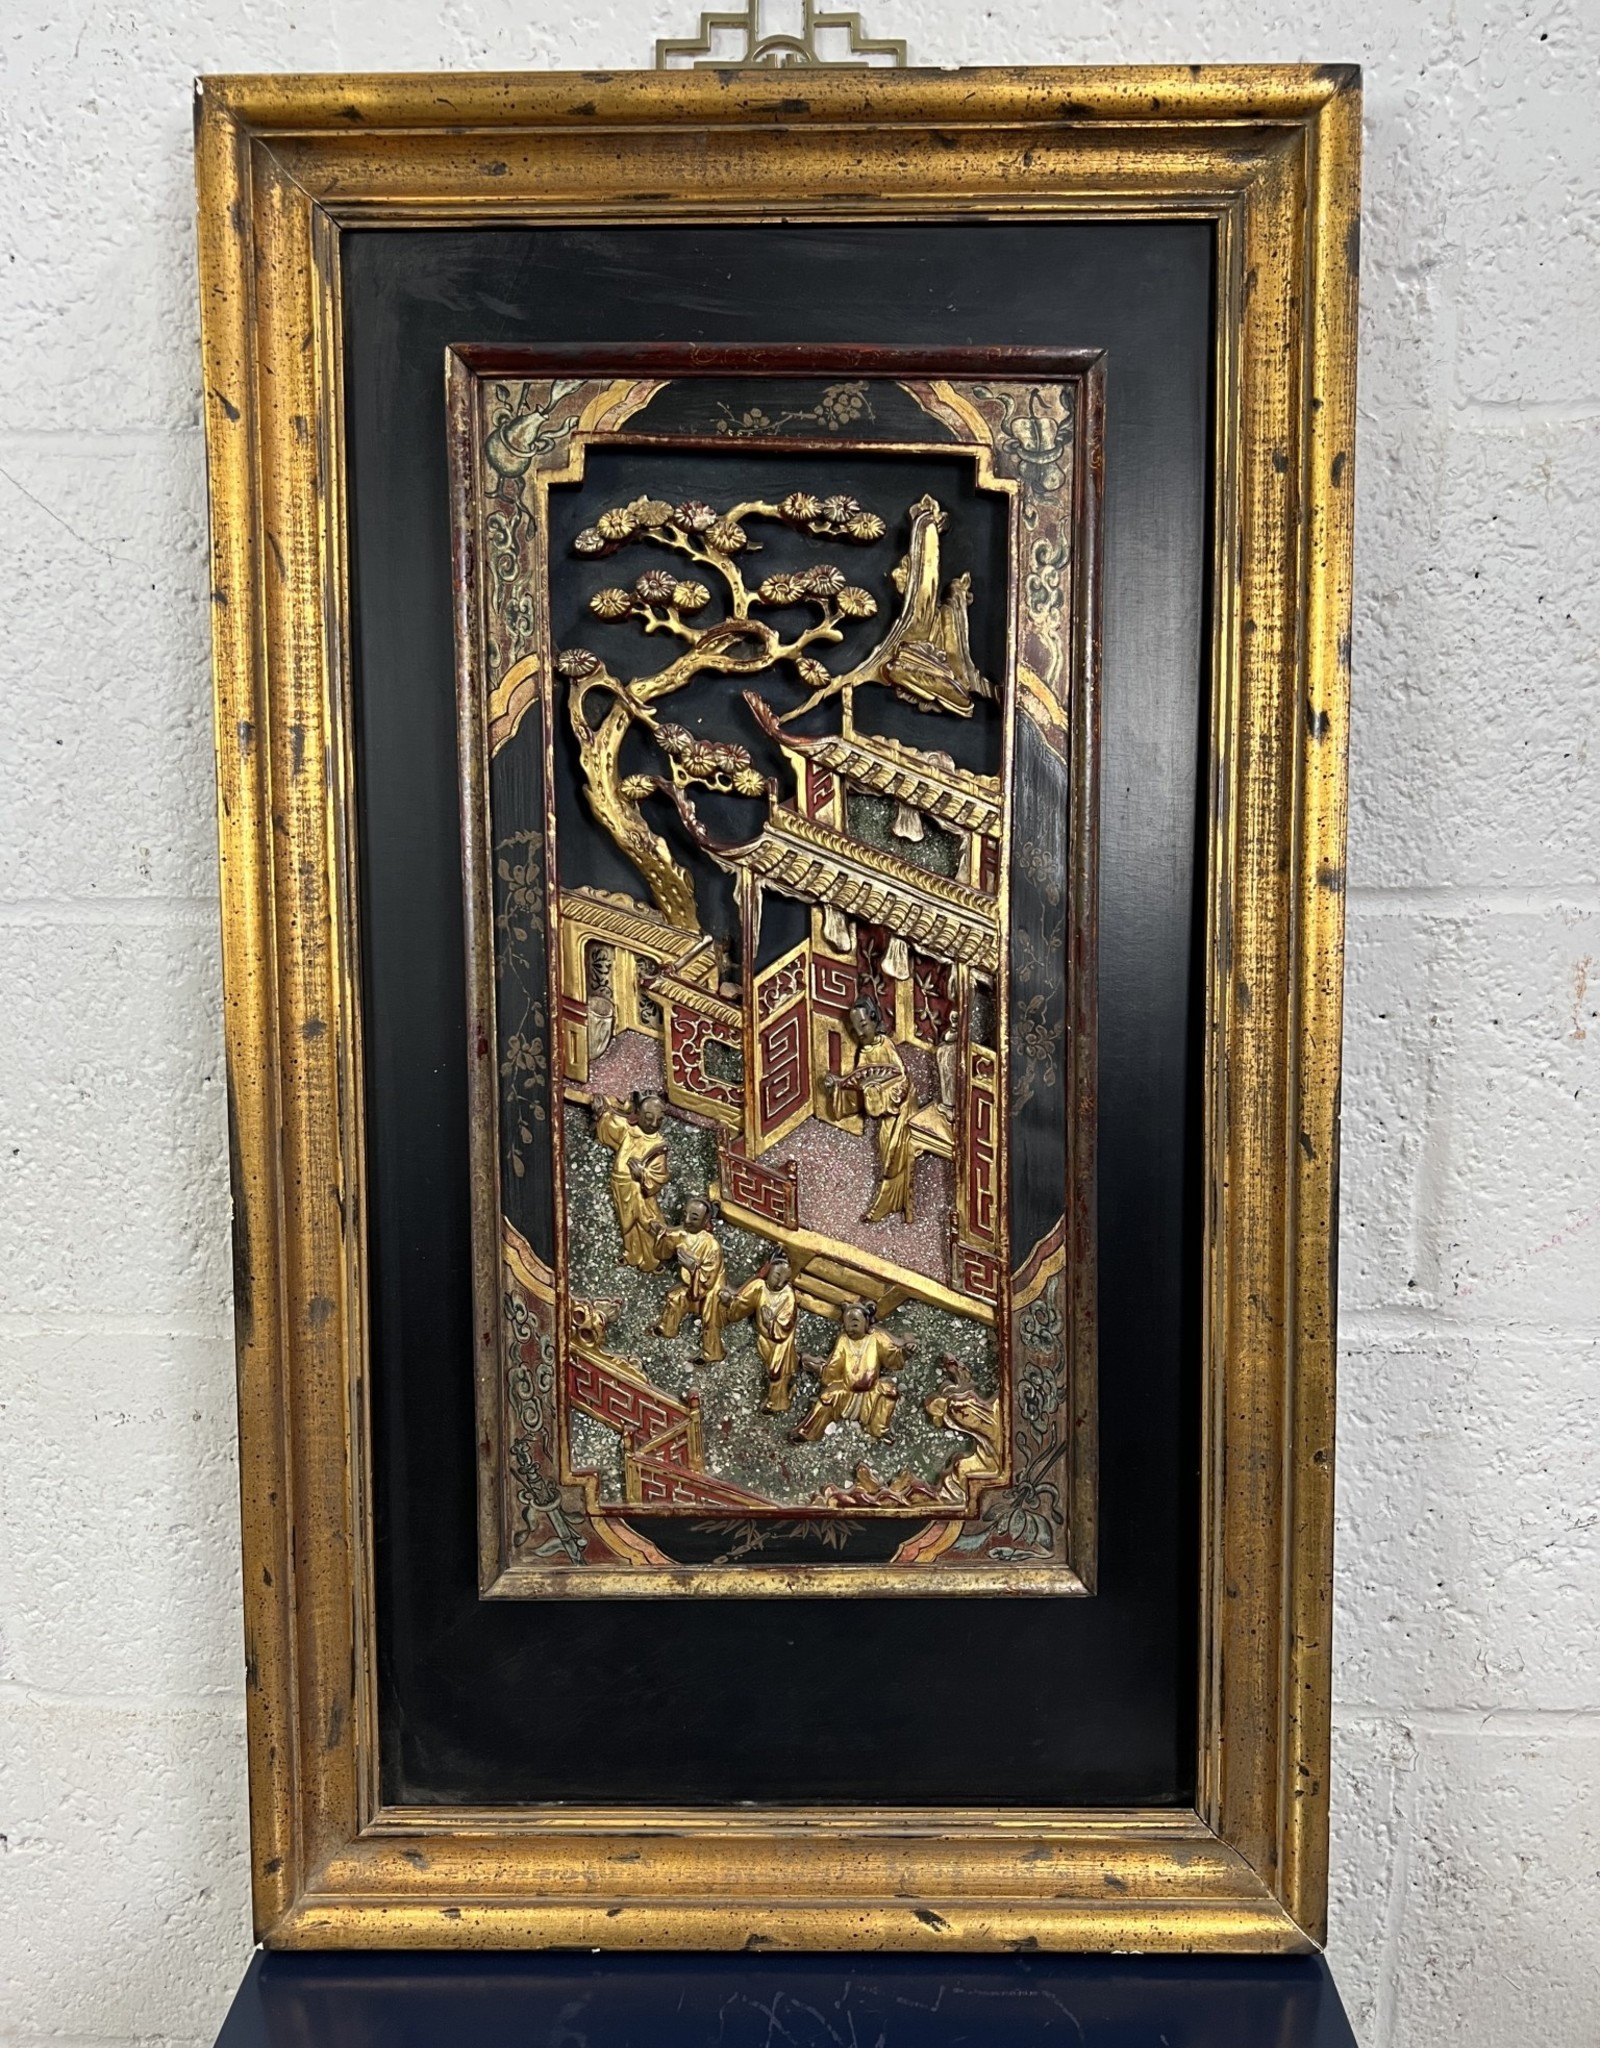 Late Qing Dynasty Framed Gold Gilt Wall Panel